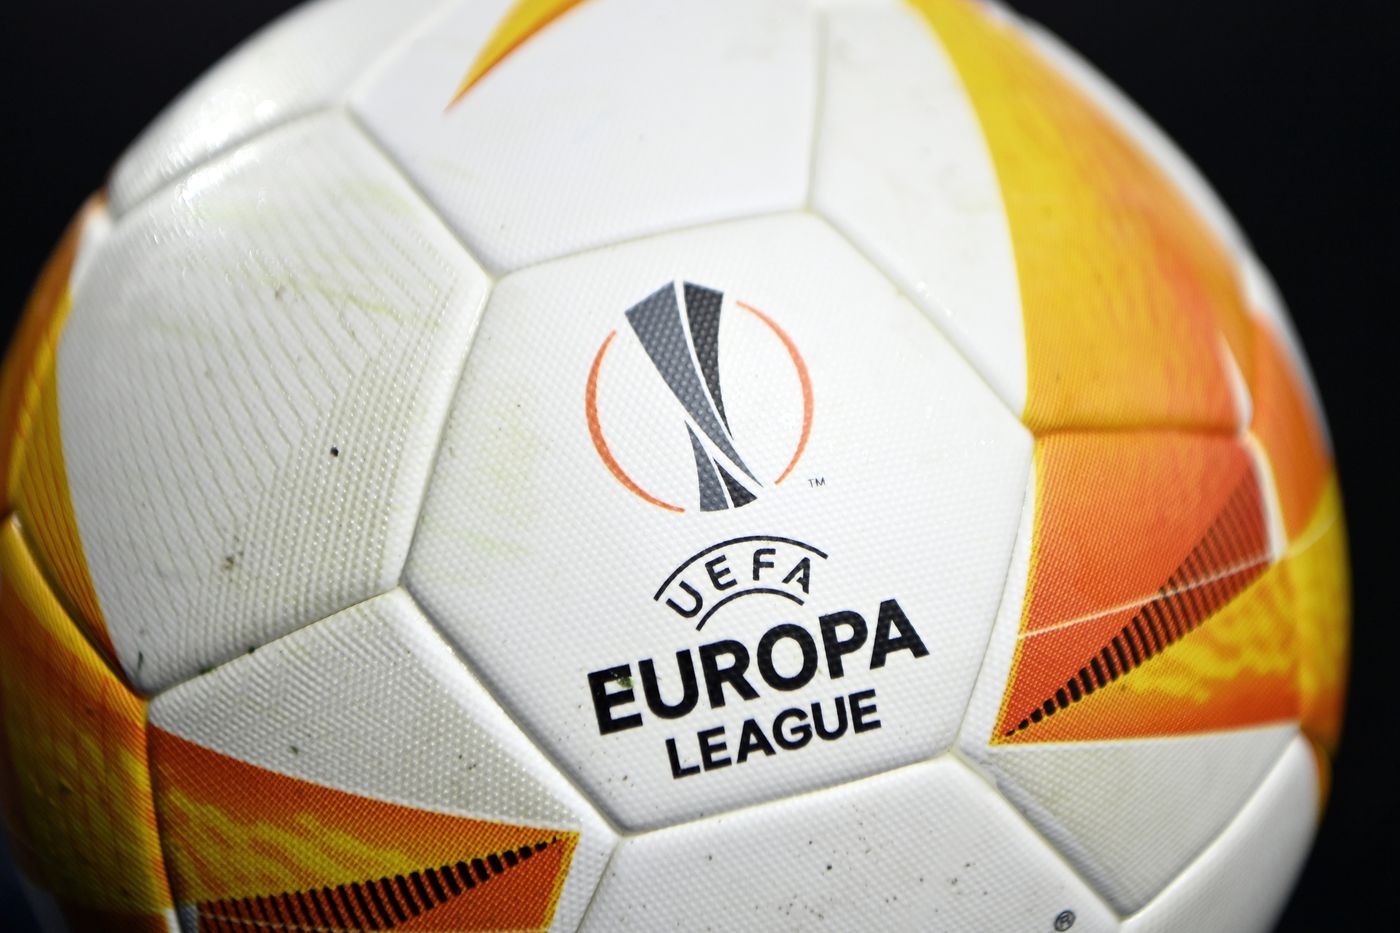 Europa League live stream: How to watch Manchester United vs. Villarreal final via live online stream